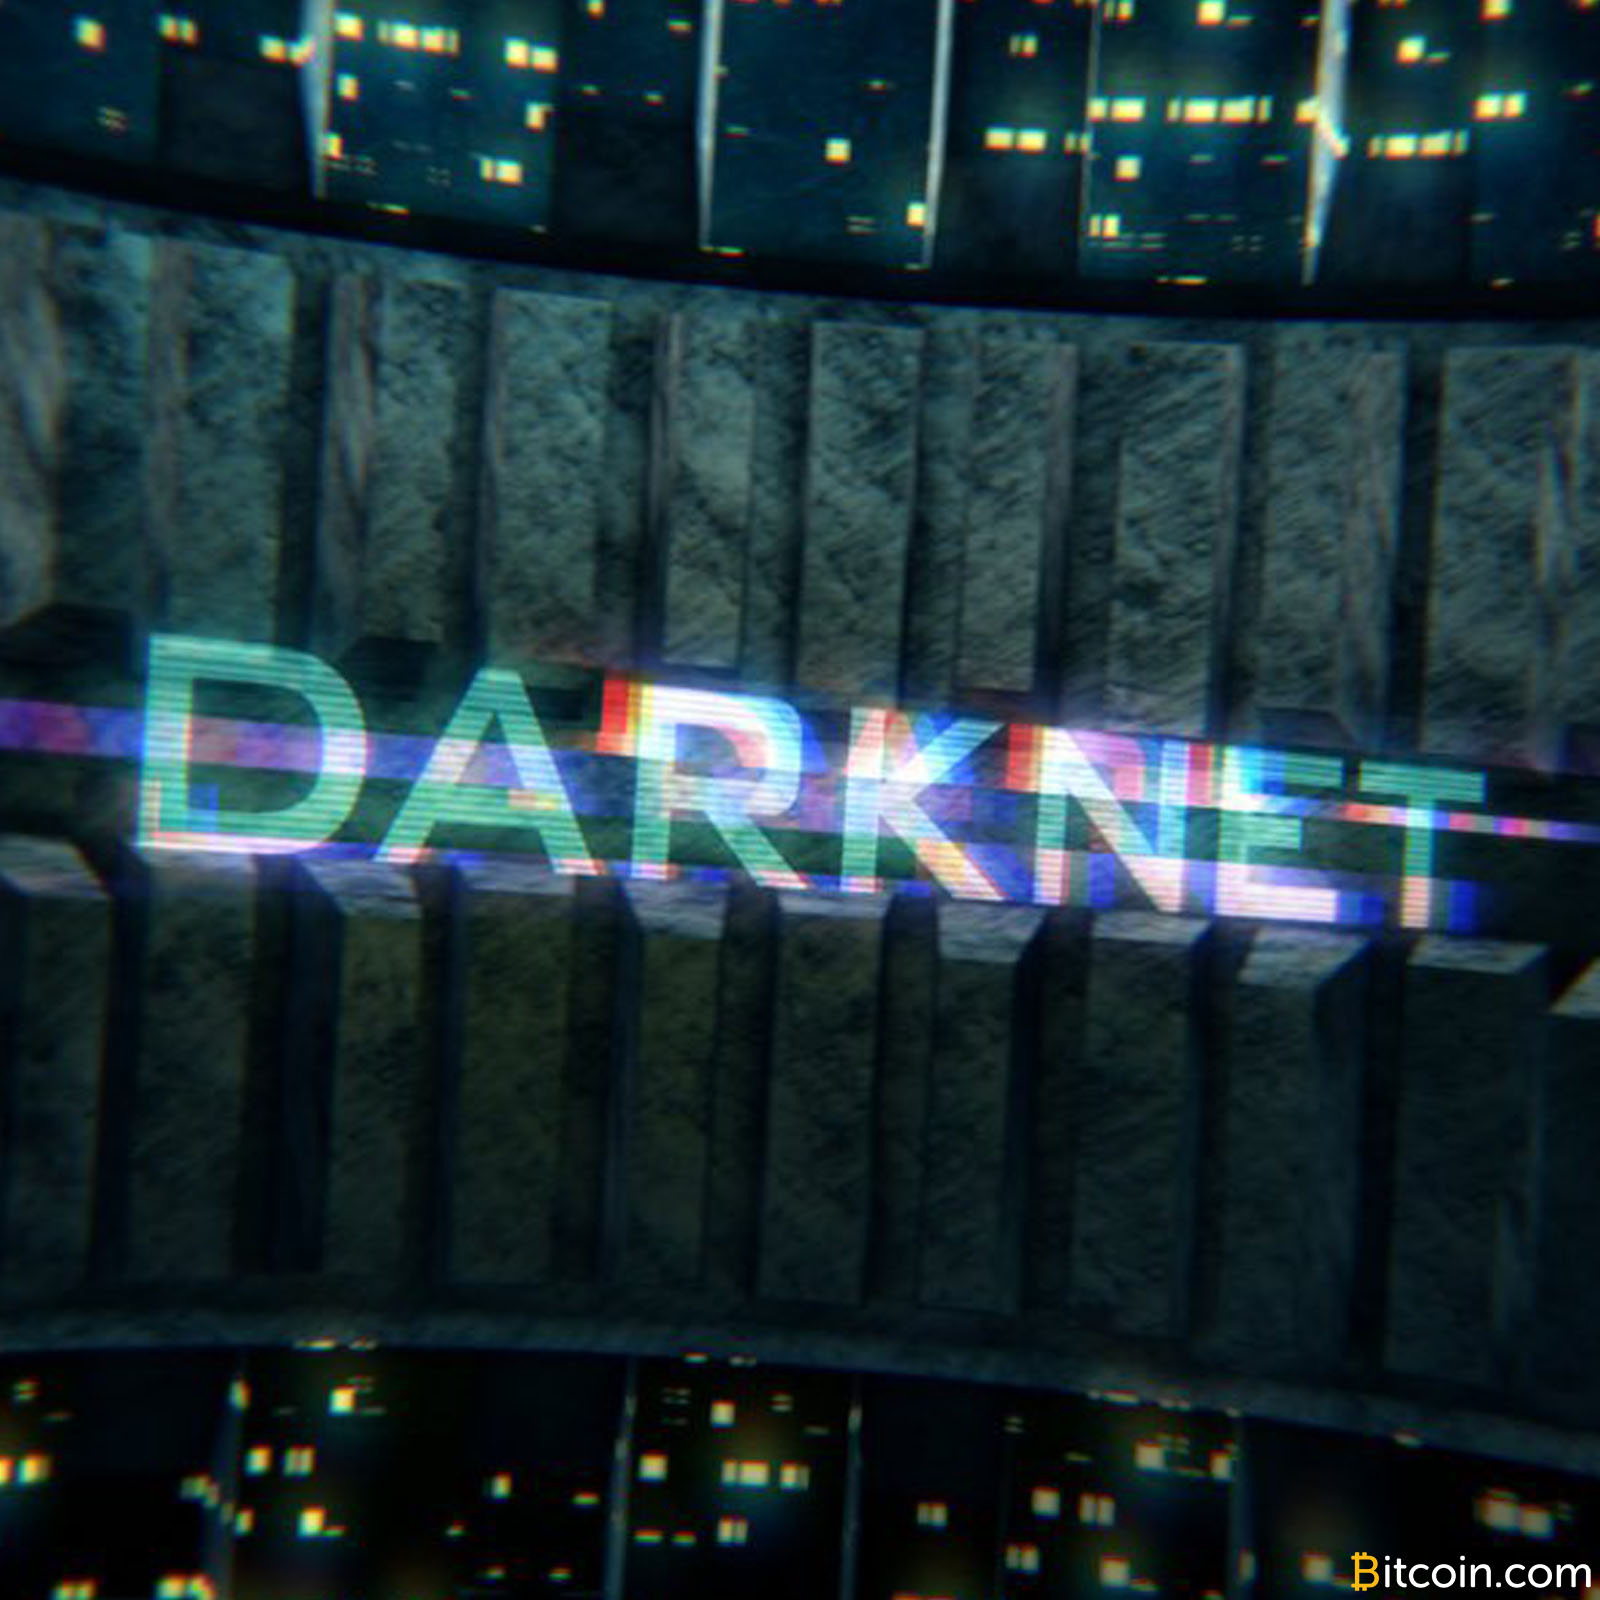 Darknet Markets Are Back – But With the Blockchain Bloated Who’s Buying?